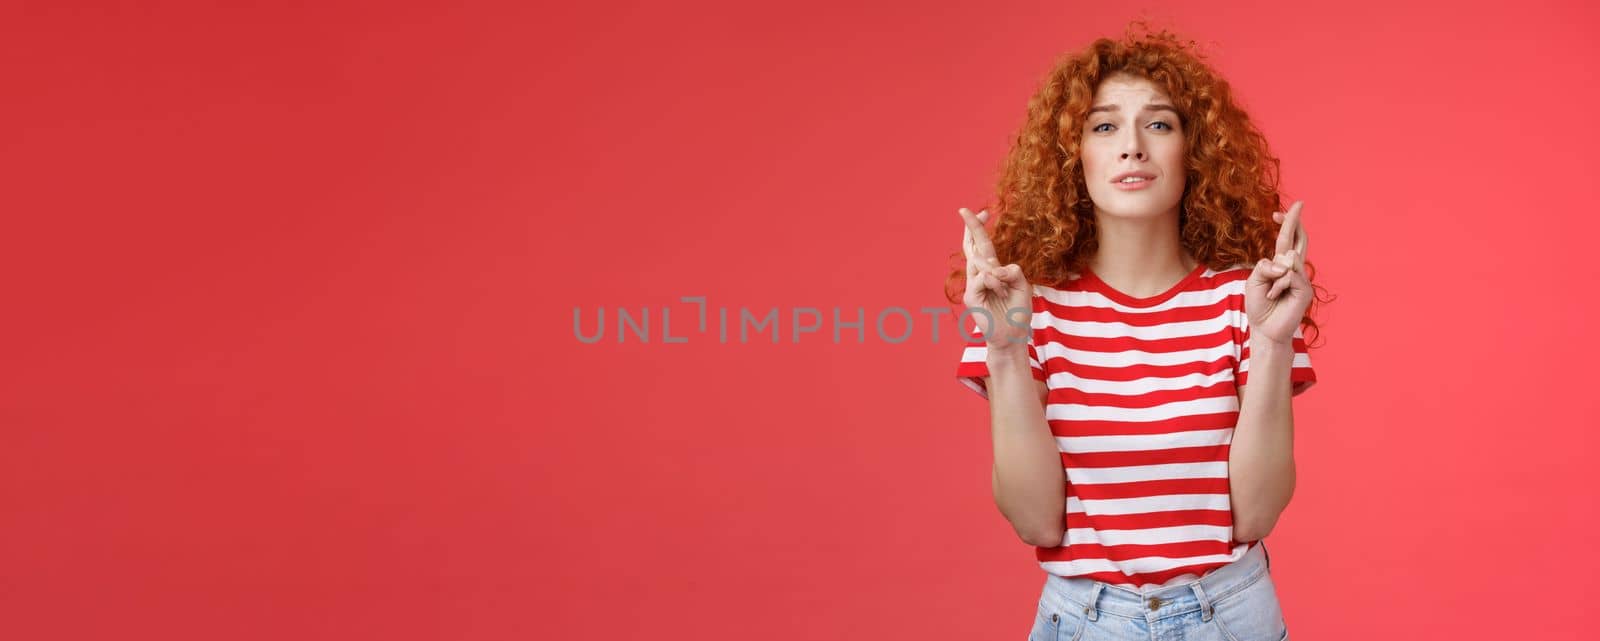 Nervous young silly timid cute redhead ginger girl anticipating hopeful results believe praying squinting intense worry to win cross fingers good luck wish come true red background by Benzoix